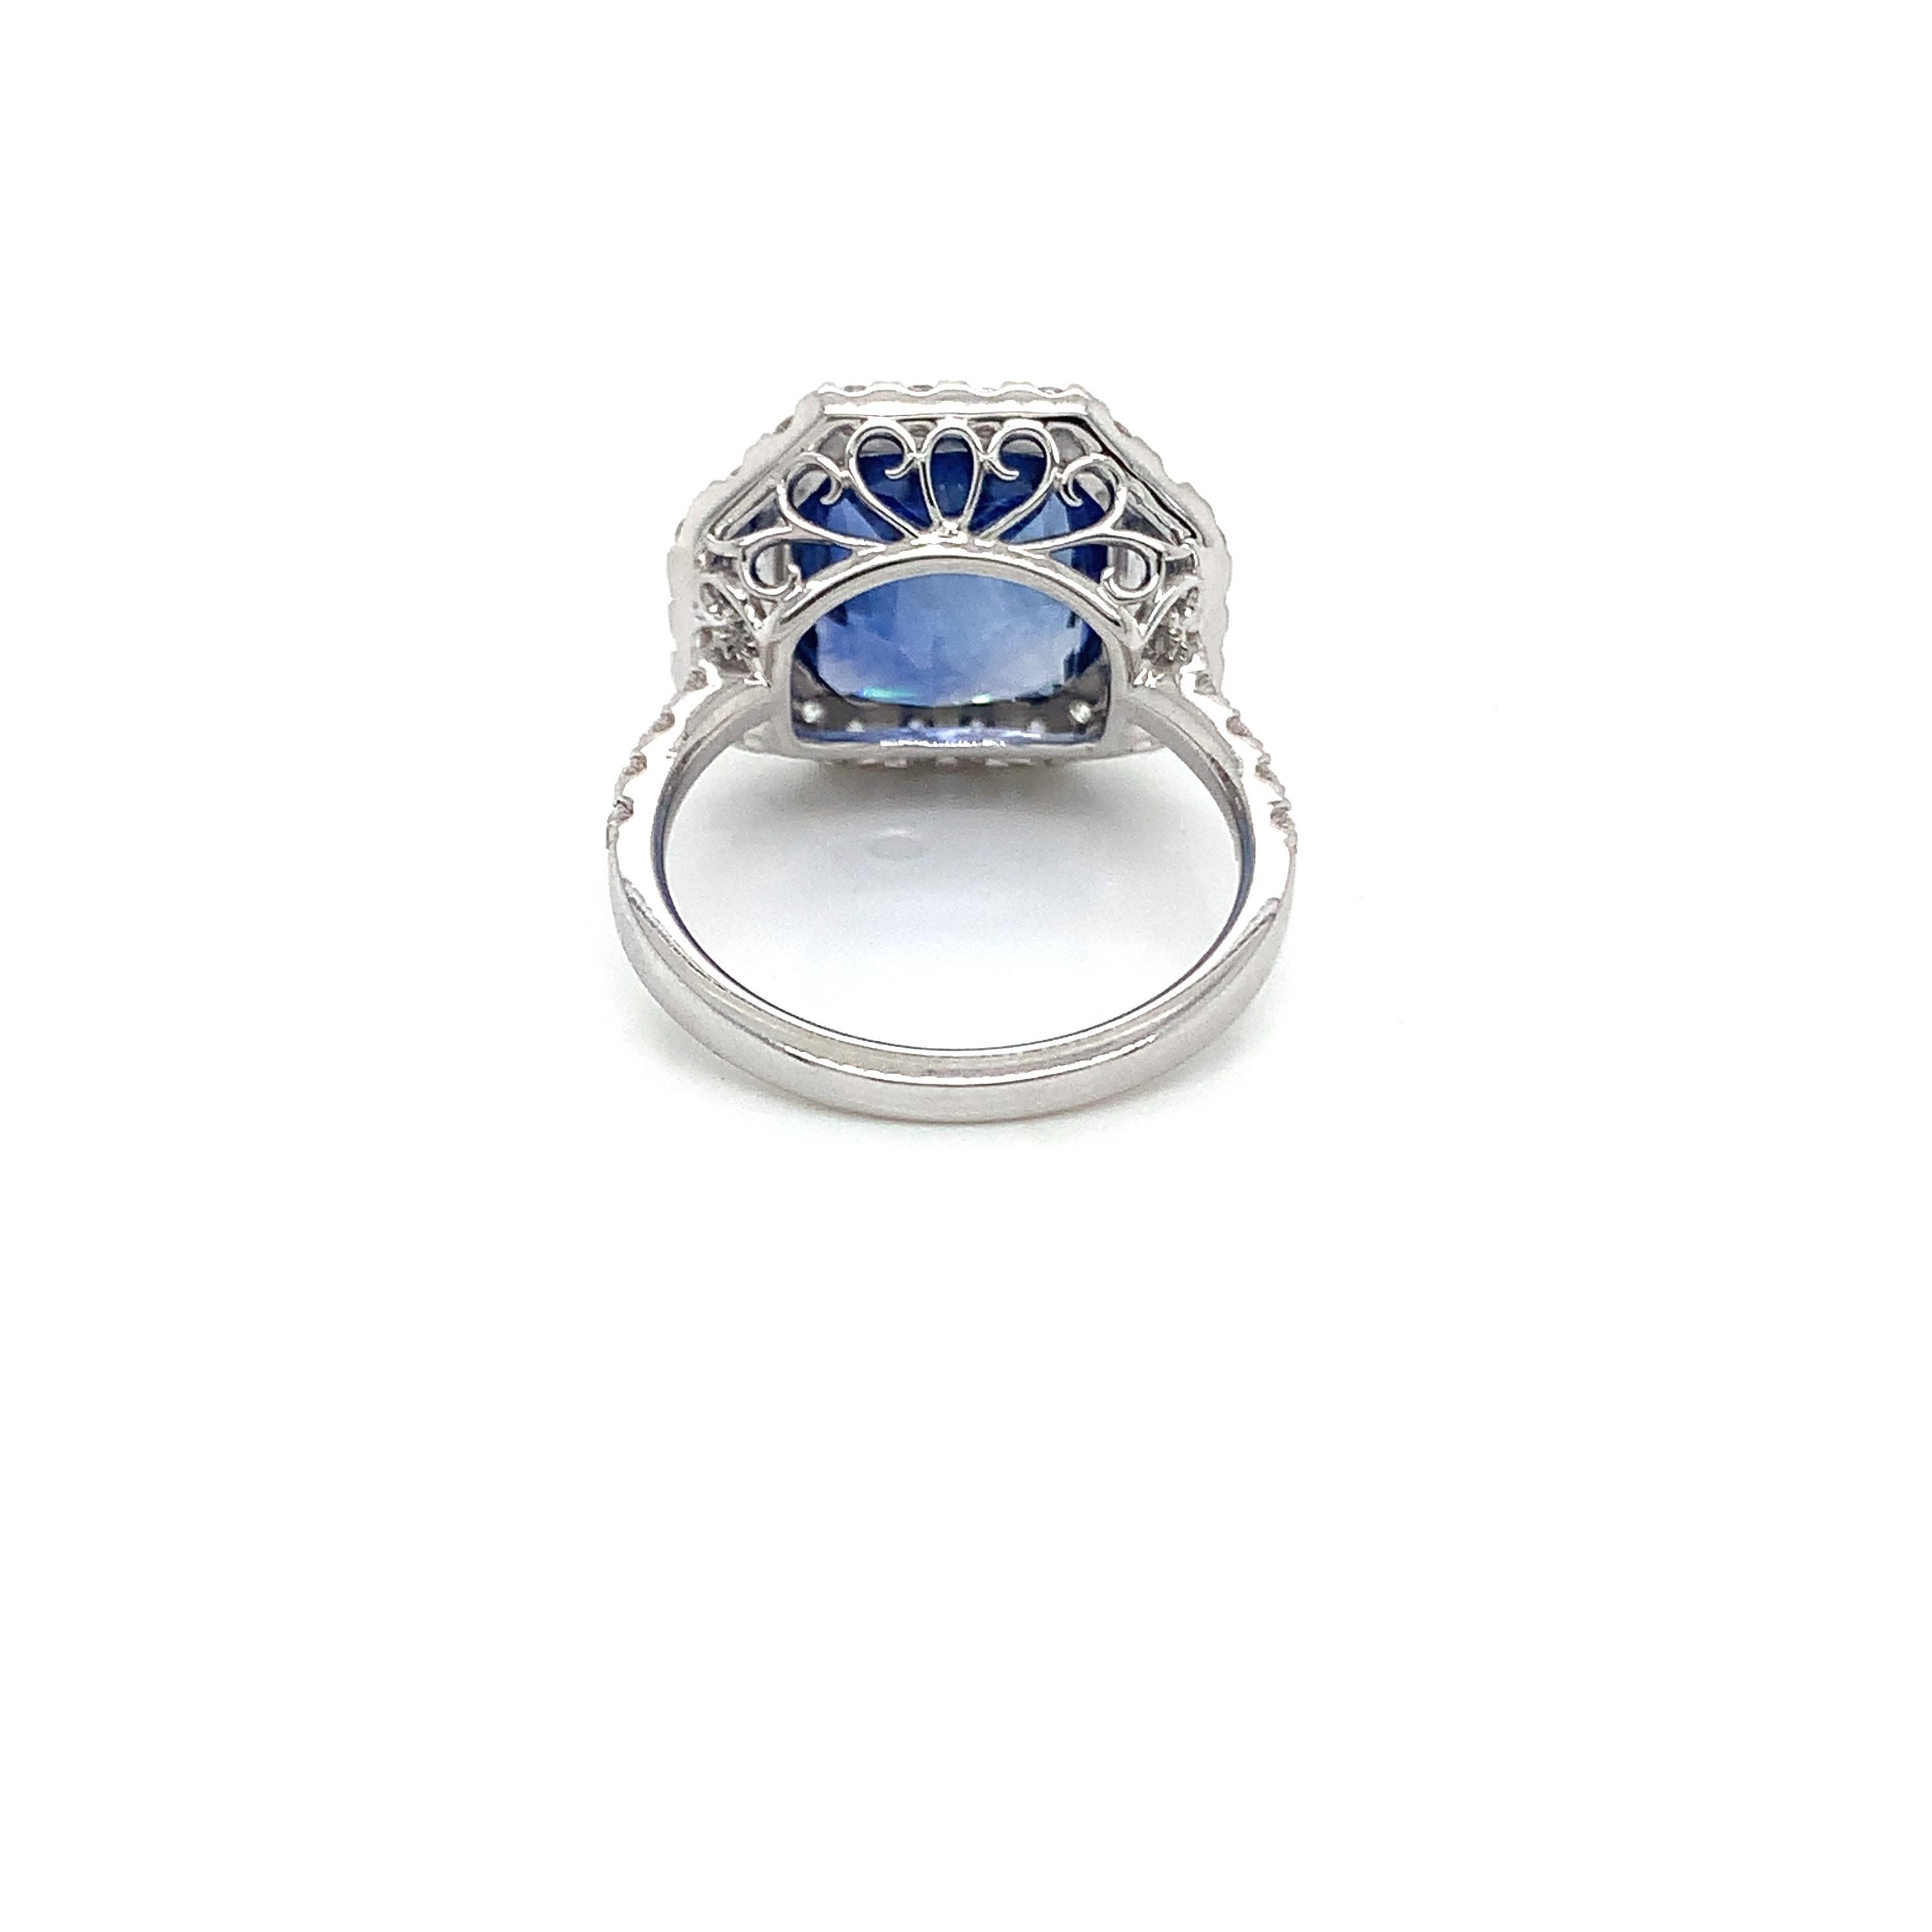 7.96 Carat Blue Sapphire & Diamond Ring in 18 Karat White Gold In New Condition For Sale In Great Neck, NY